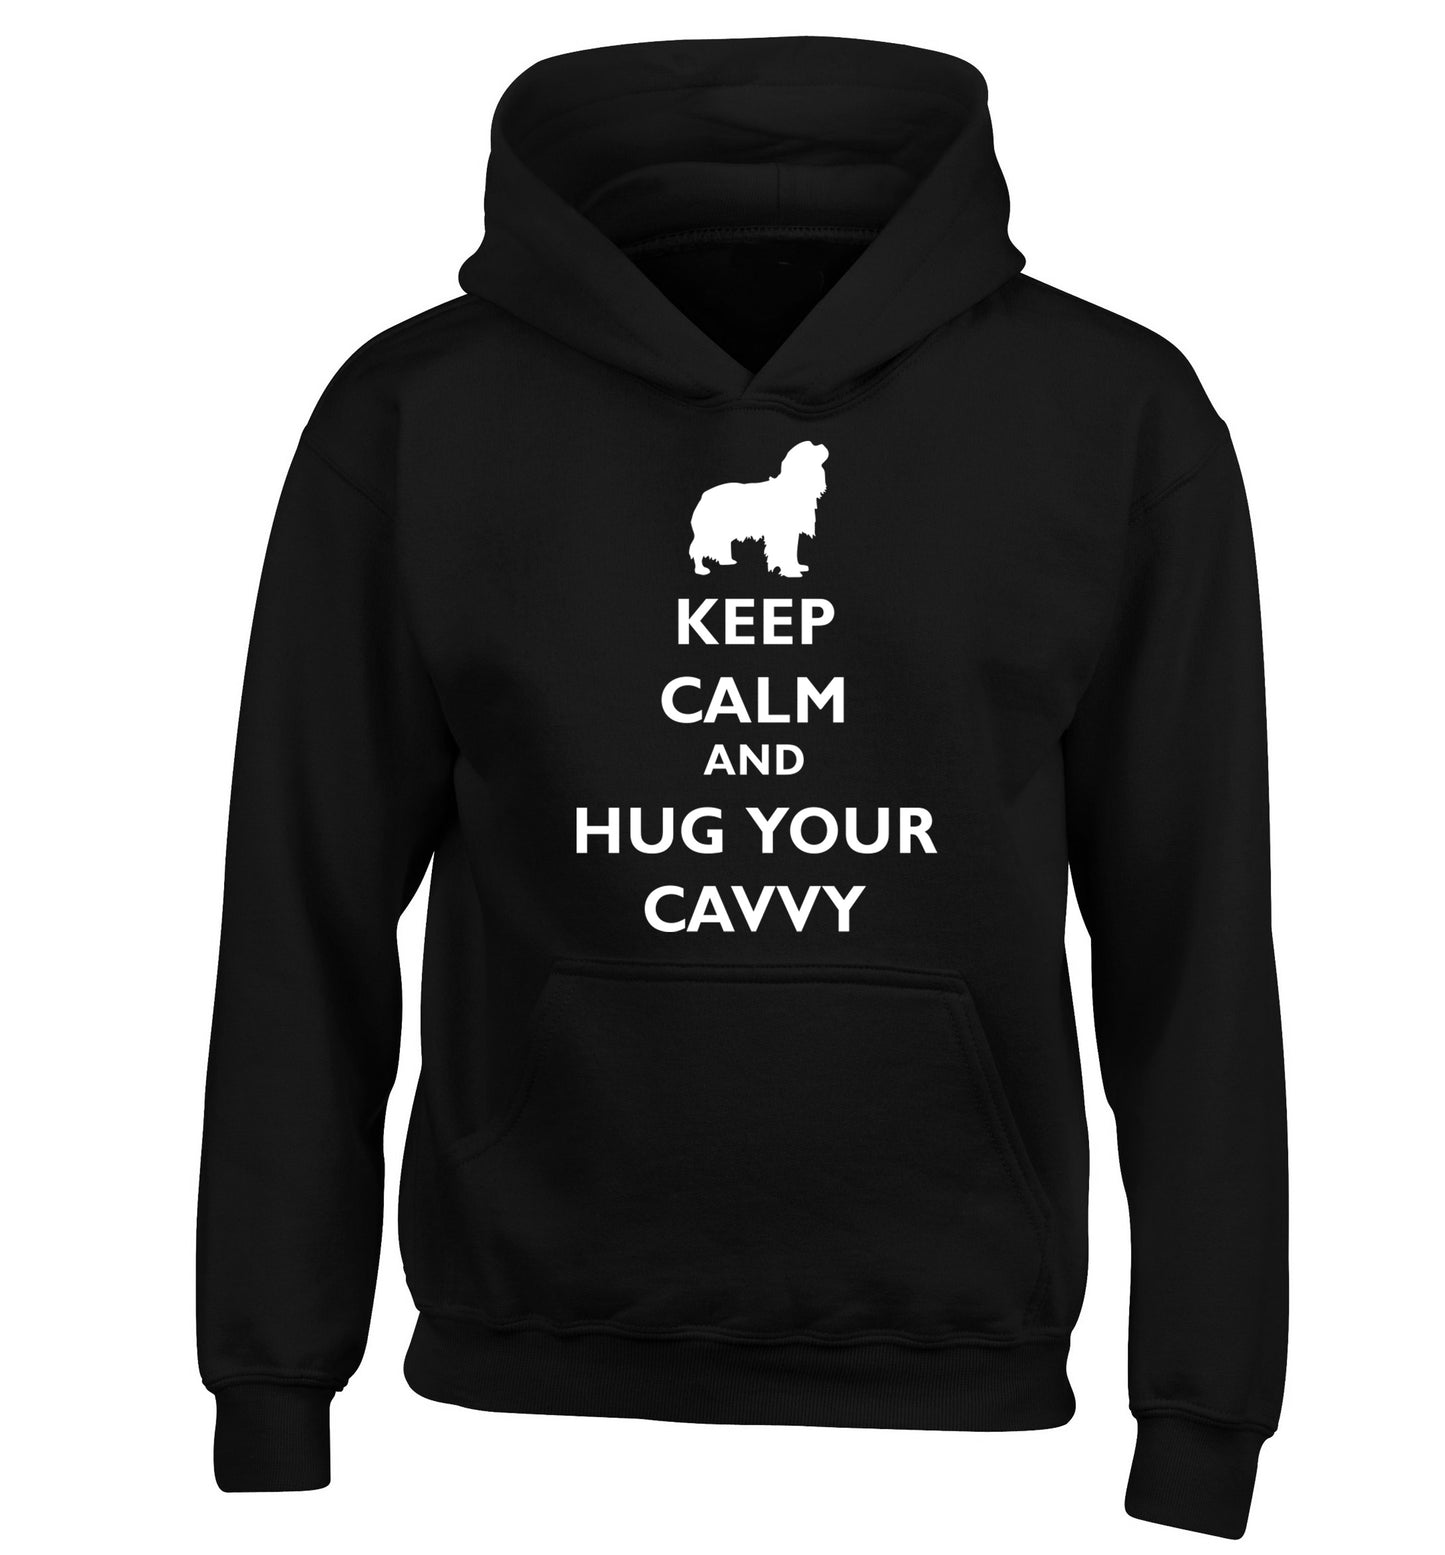 Keep calm and hug your cavvy children's black hoodie 12-13 Years